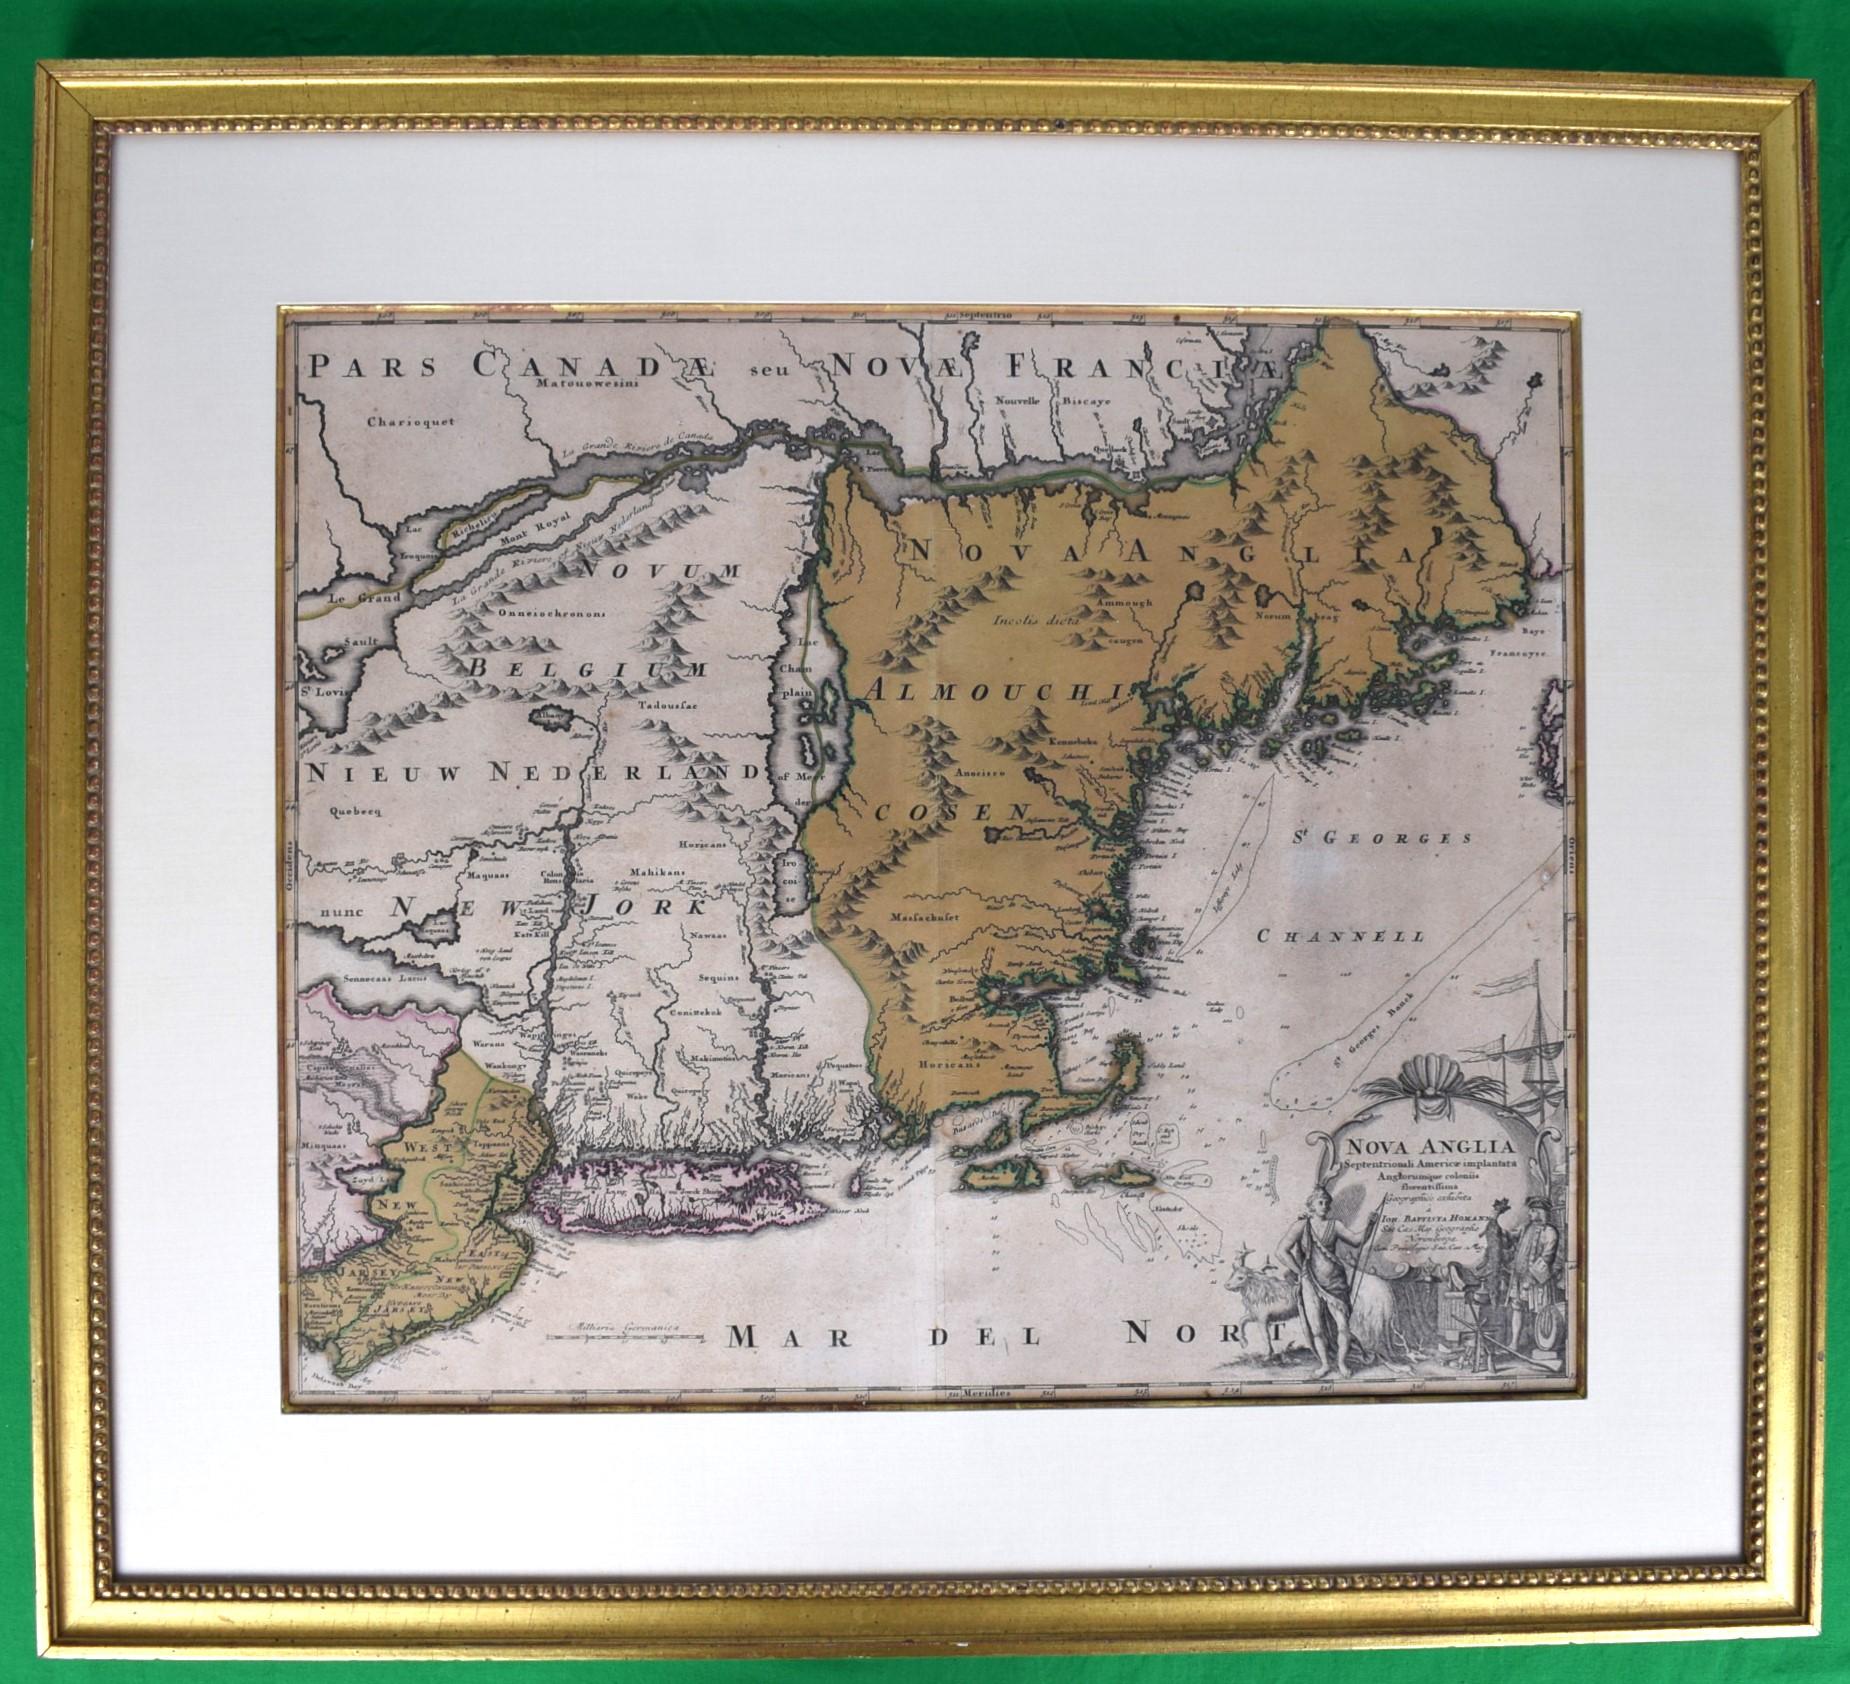 Map Sz: 18 3/4"H x 22 5/8"W

Frame Sz: 27 1/2"H x 31"W

Nuremberg: Homann Heirs, [circa 1740]. Copper-engraved map, with full original colour.

A highly fascinating and attractive map that showcases the curious nature of geographical knowledge of